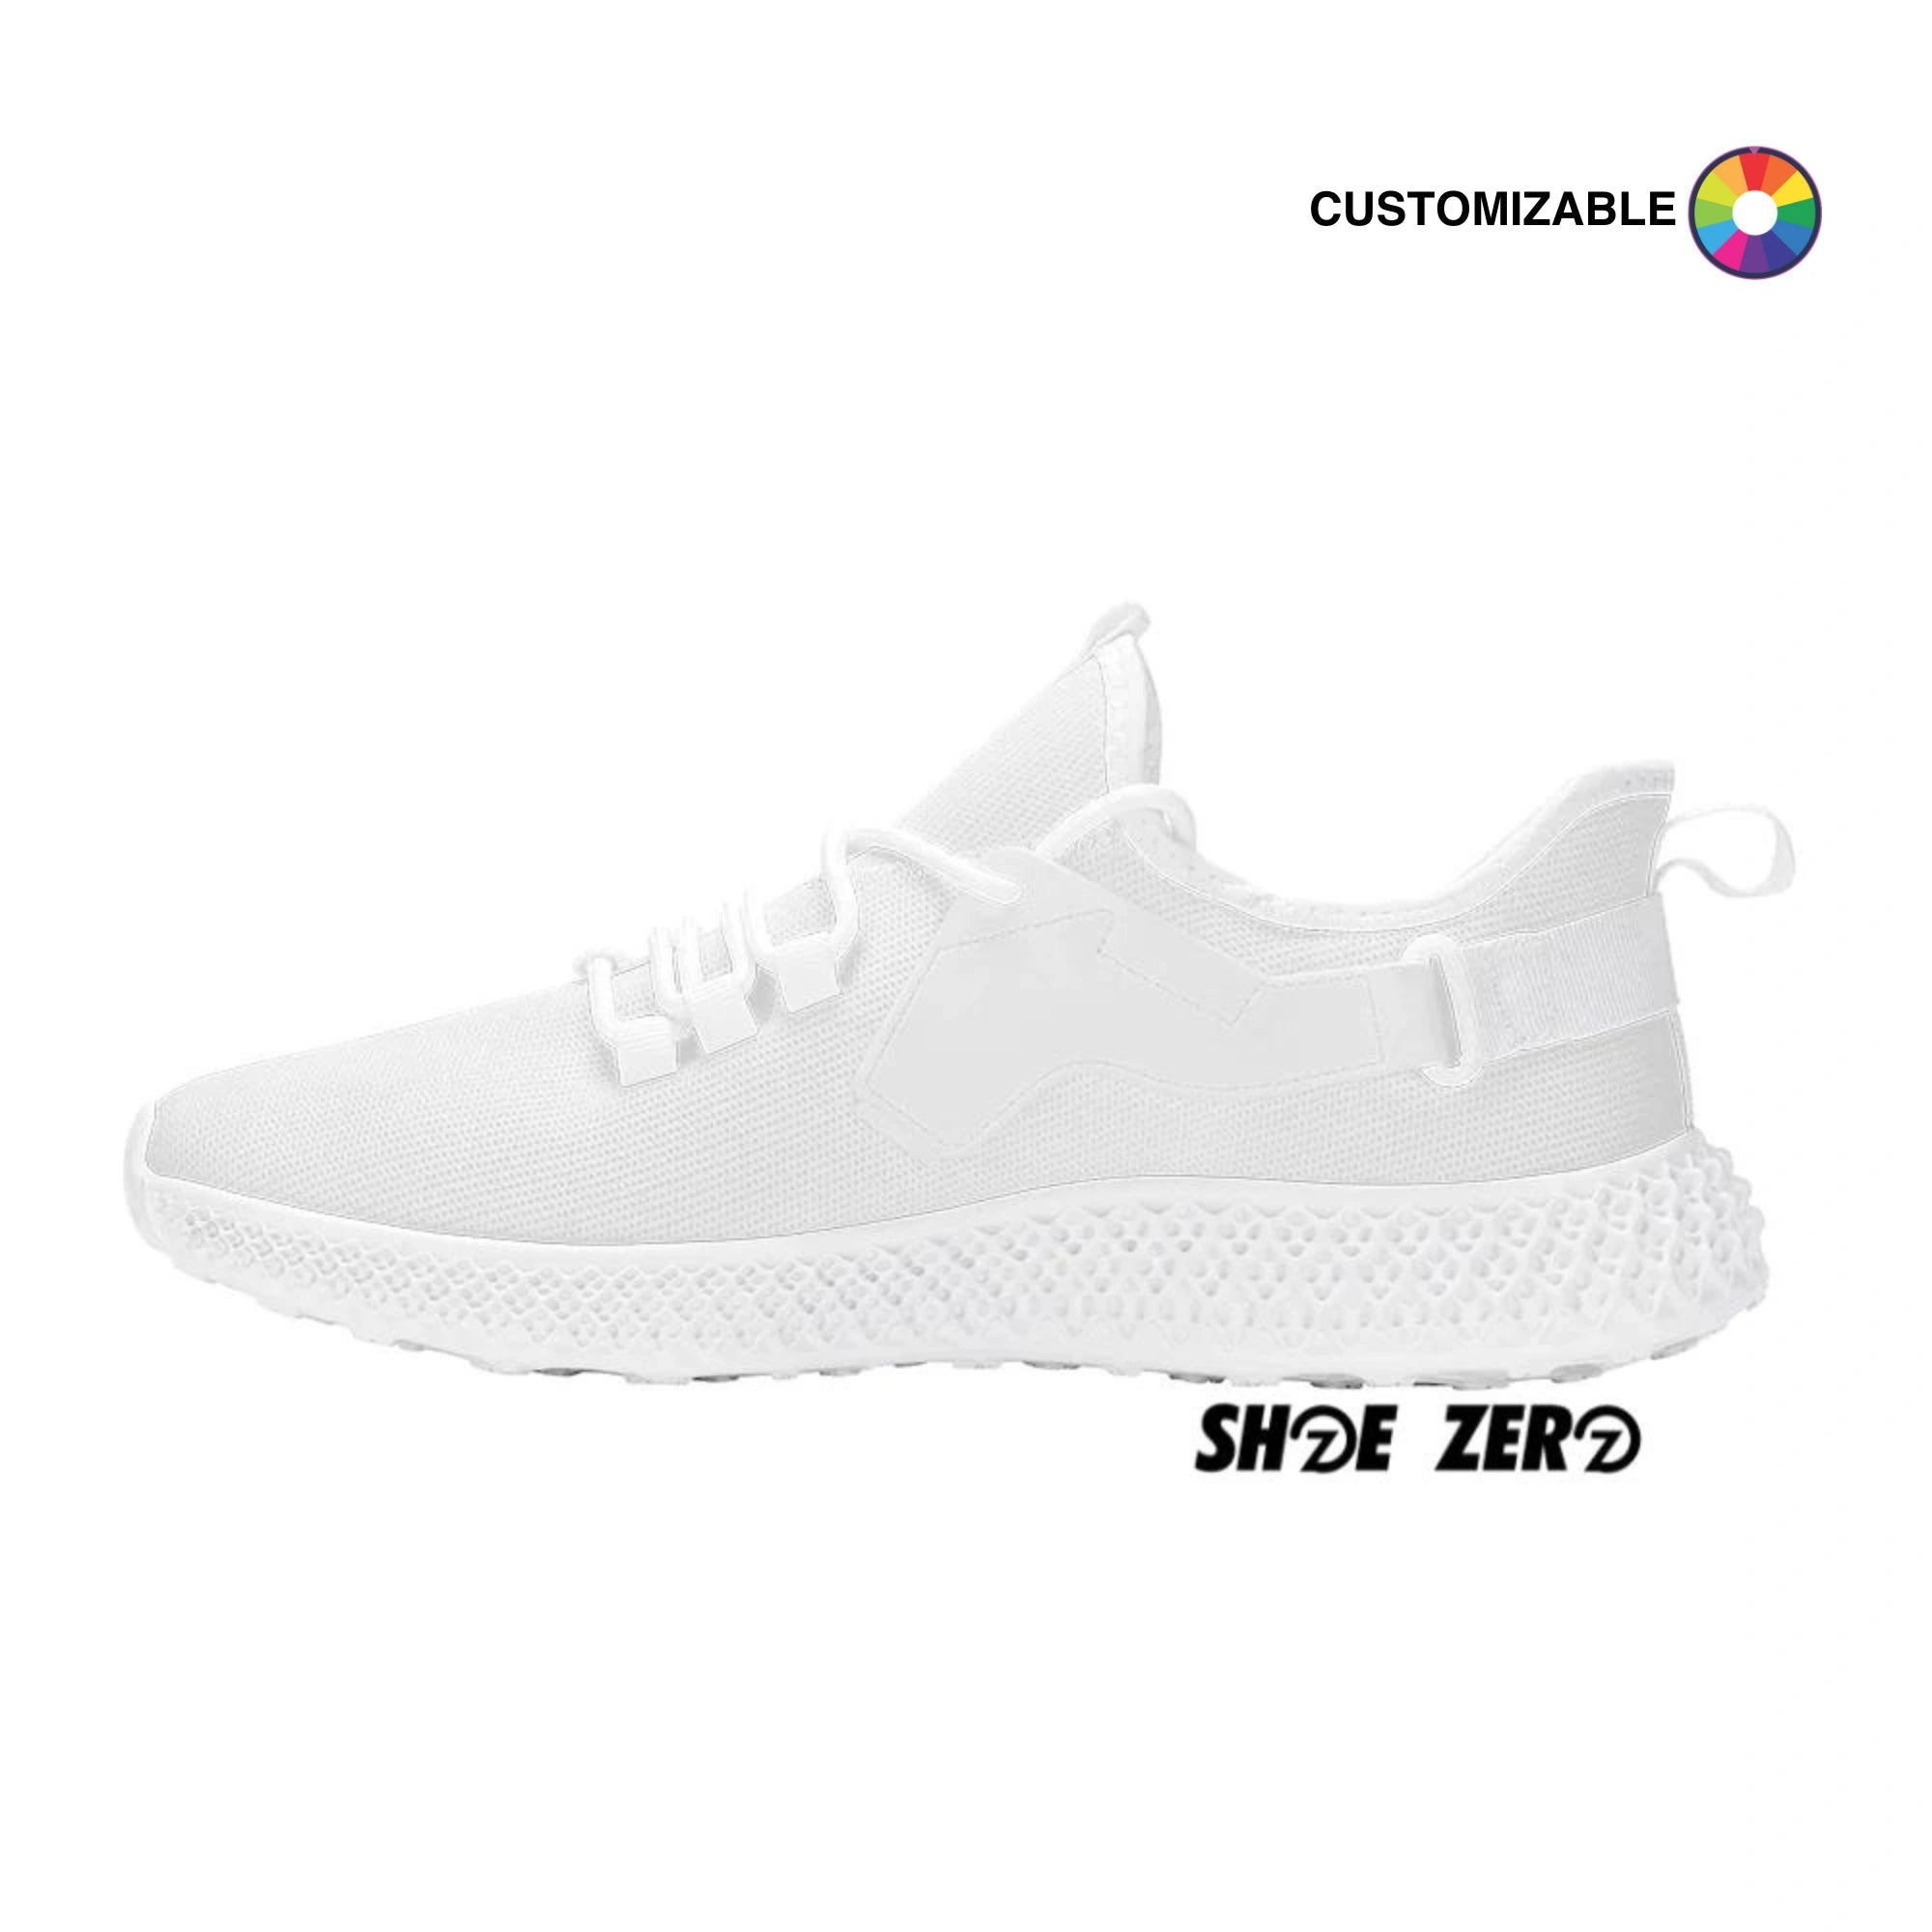 Customizable New Arrival Mesh Knit Shoes | Design your own | Shoe Zero